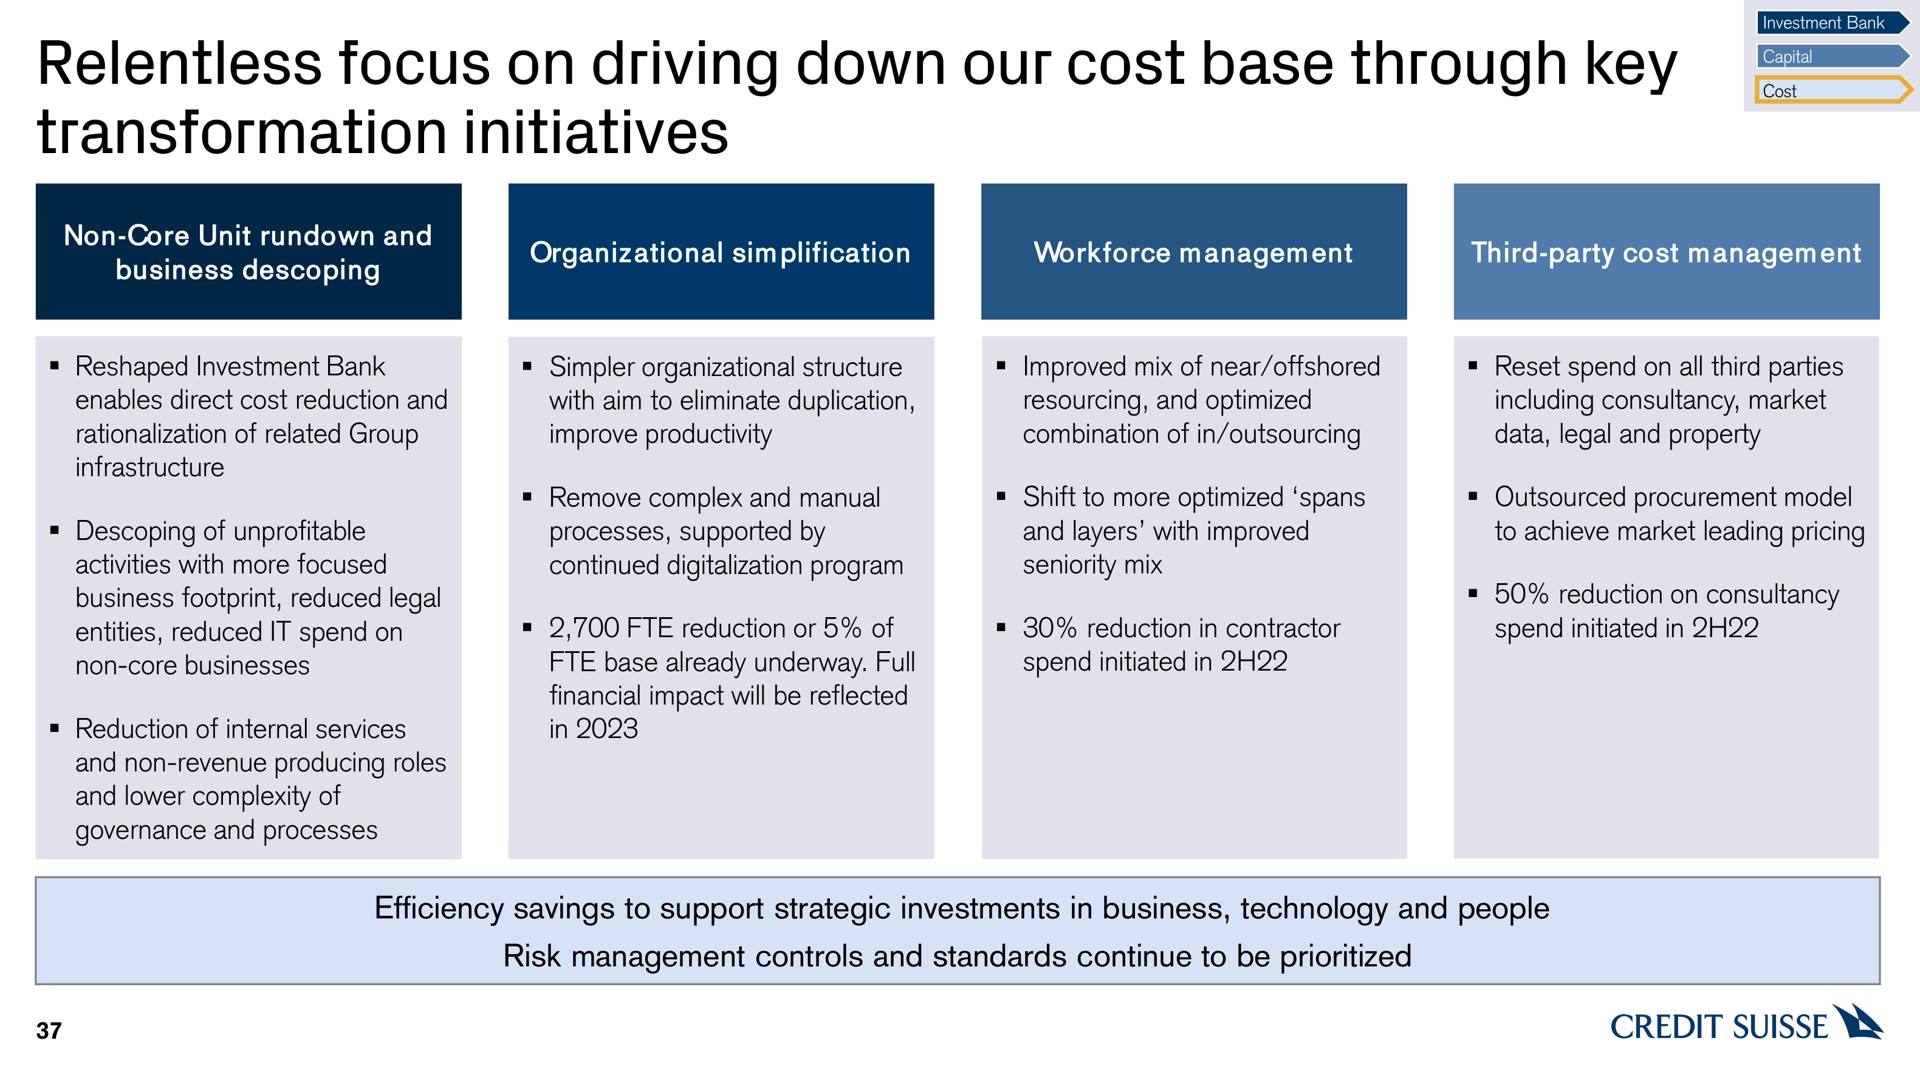 relentless focus on driving down our cost base through key transformation initiatives | Credit Suisse